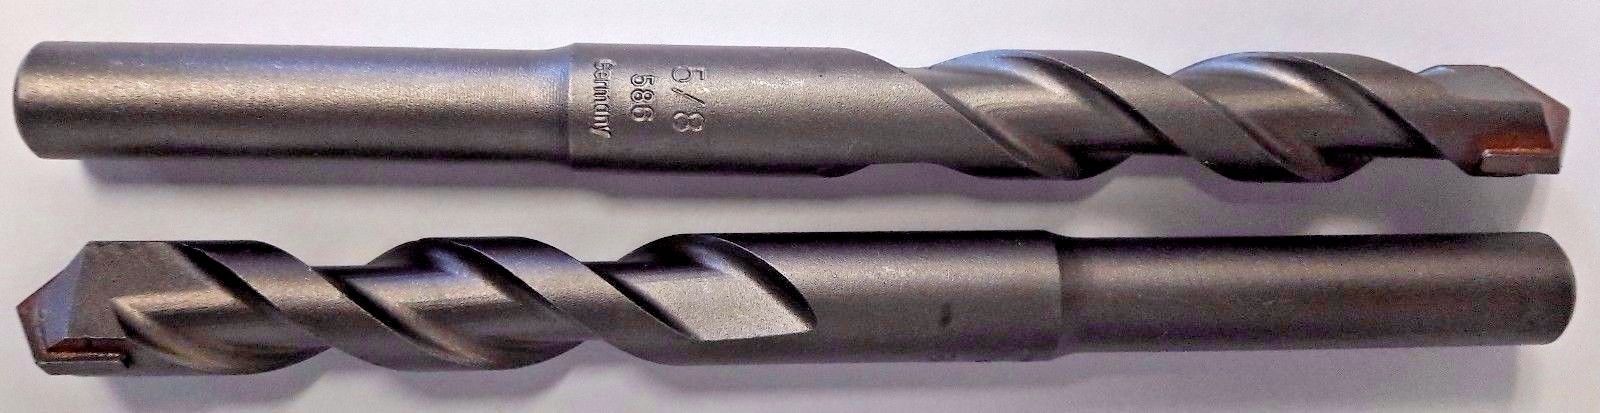 Bosch 220869 5/8 x 6-3/8 Carbide Tipped Rotary Percussion Drill Bit Germany 2pcs